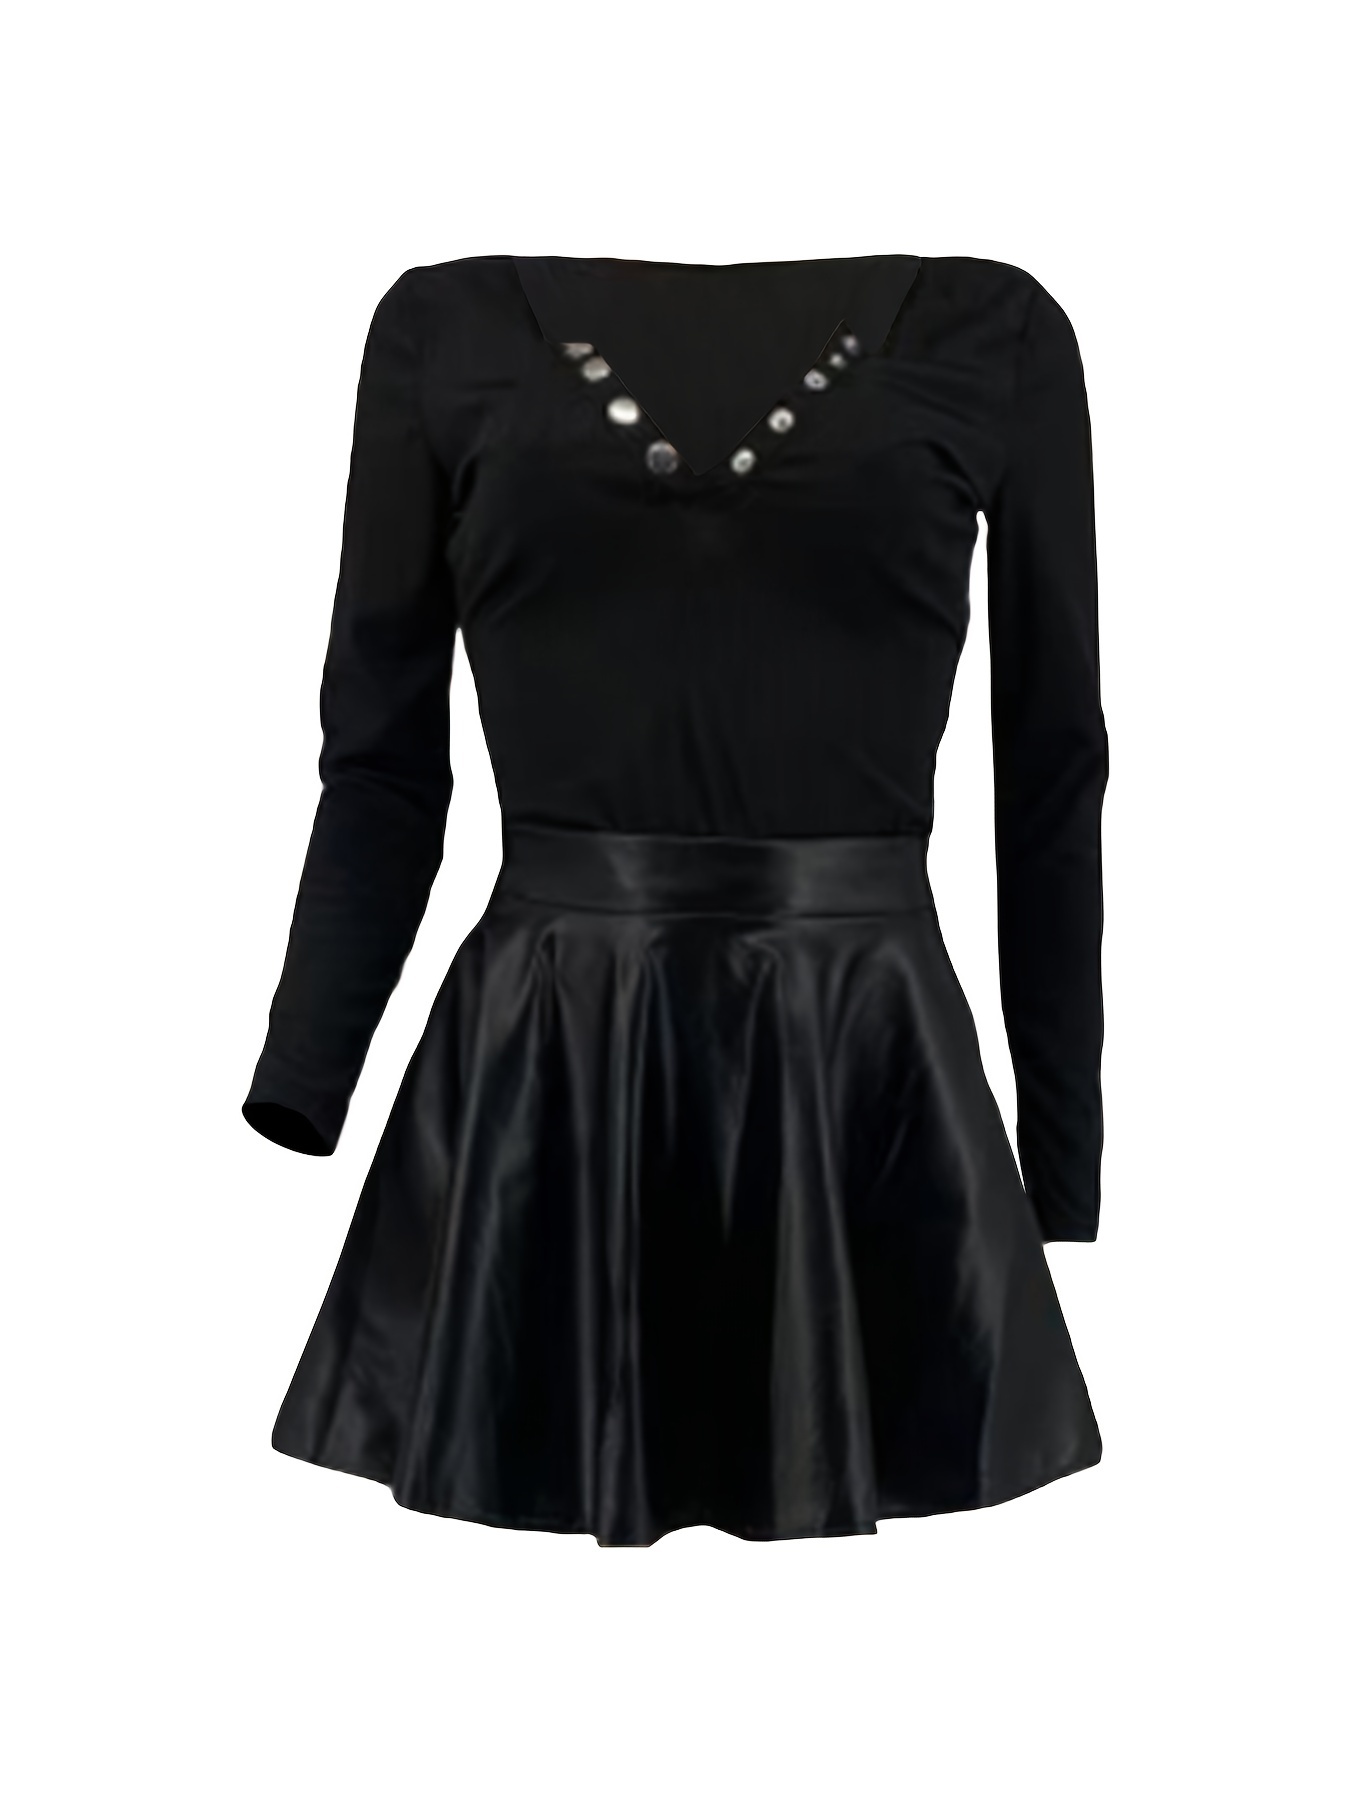 Chic Black Bandage Two Piece Set For Women Black Skirt Outfits And Top For  Evening Parties And Special Occasions Long Sleeve Flare Dress 210525 From  Luo02, $19.57